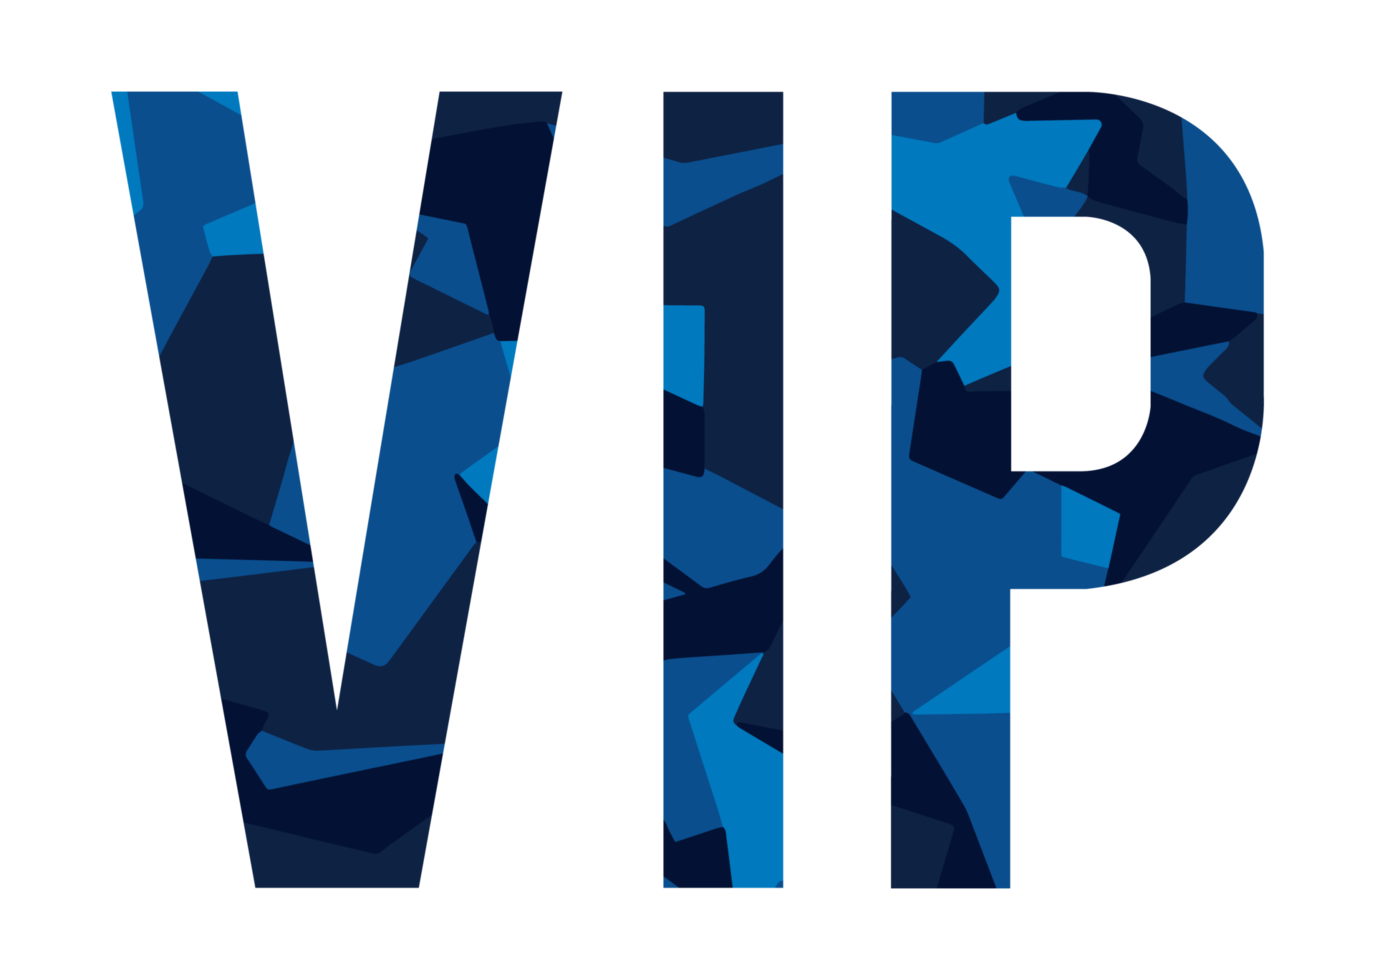 VIP typography text isolated on png transparent background